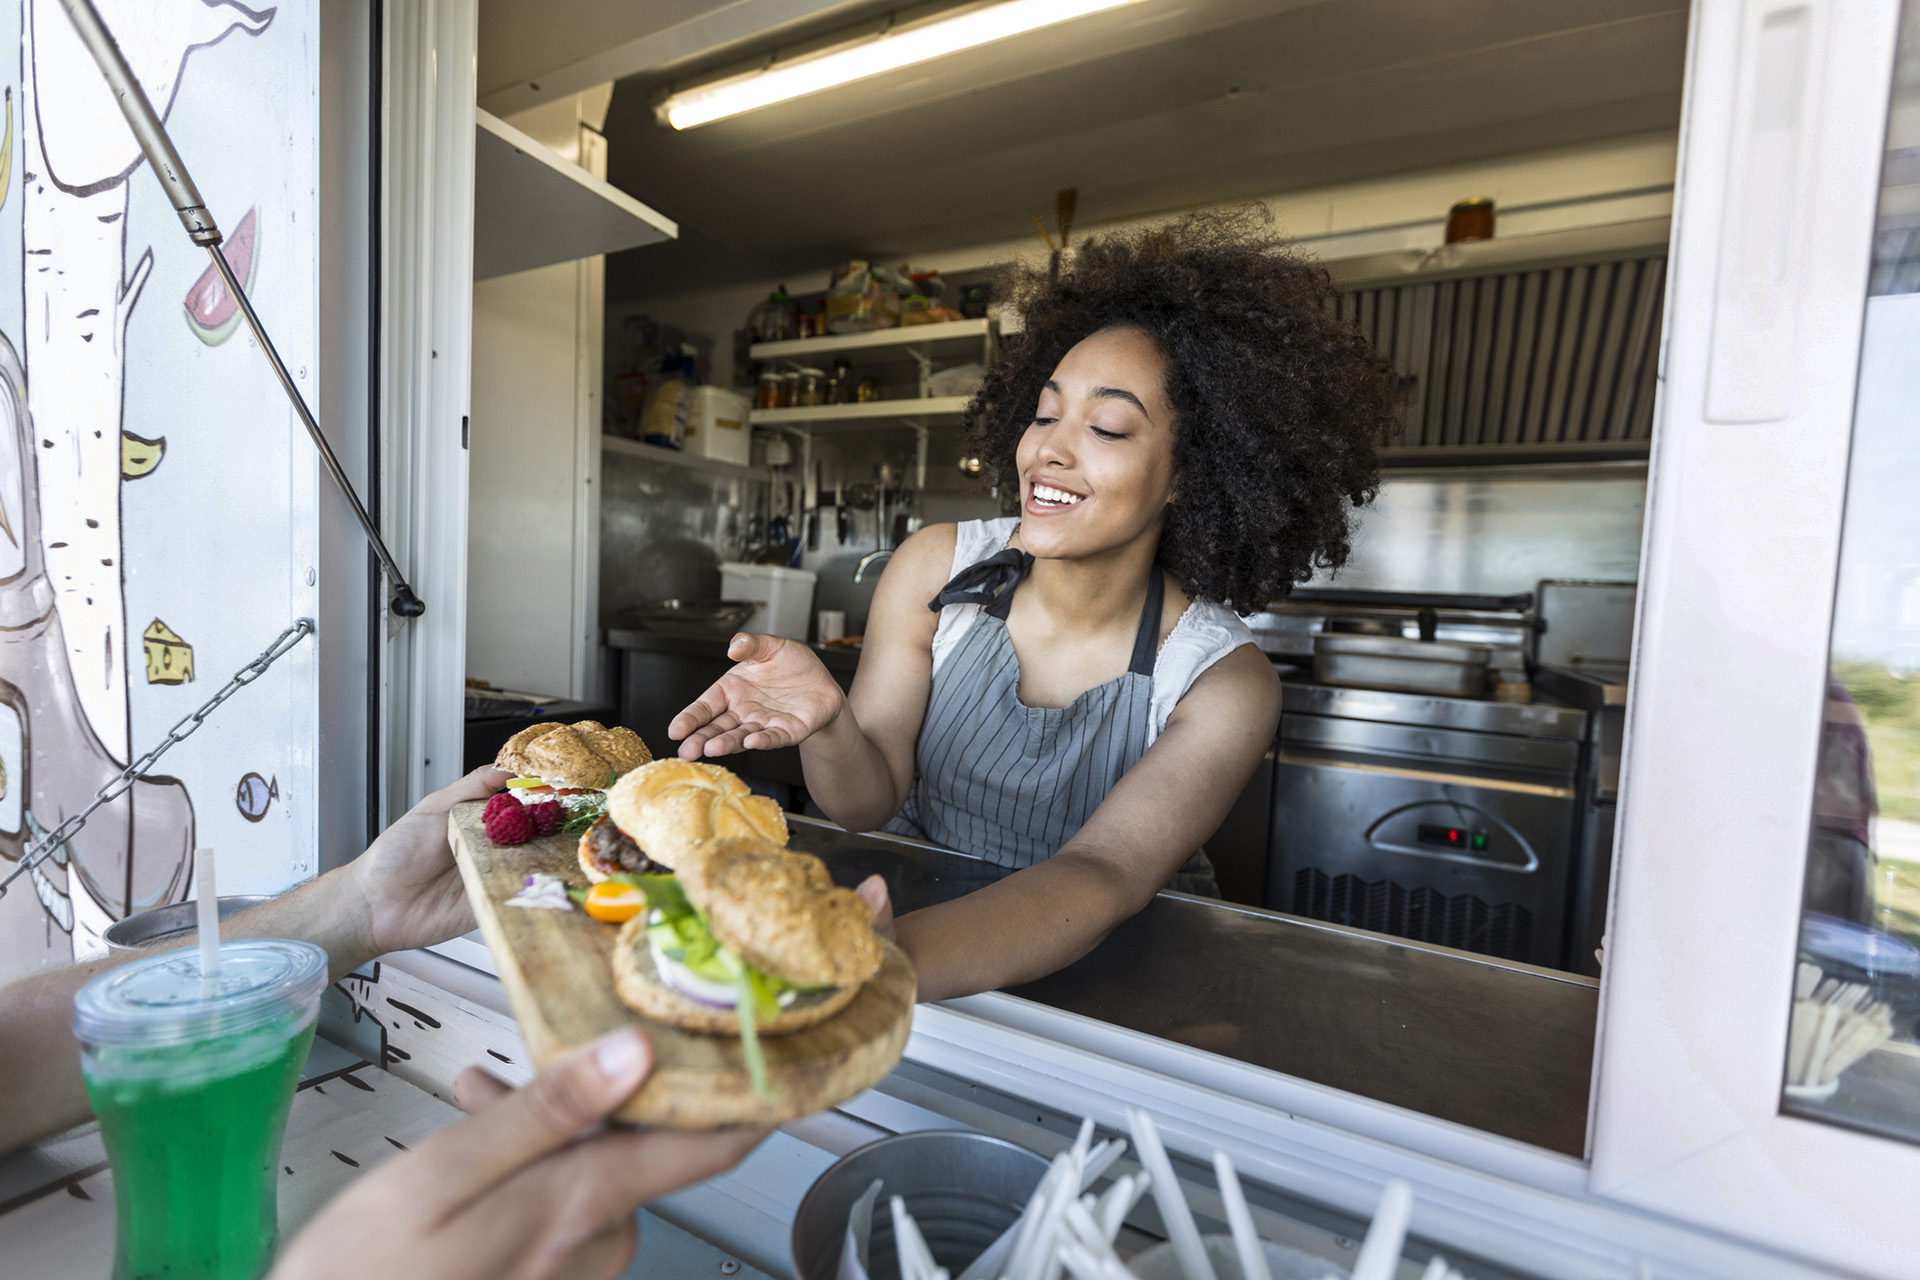 A lady serving burgers from her mobile catering van